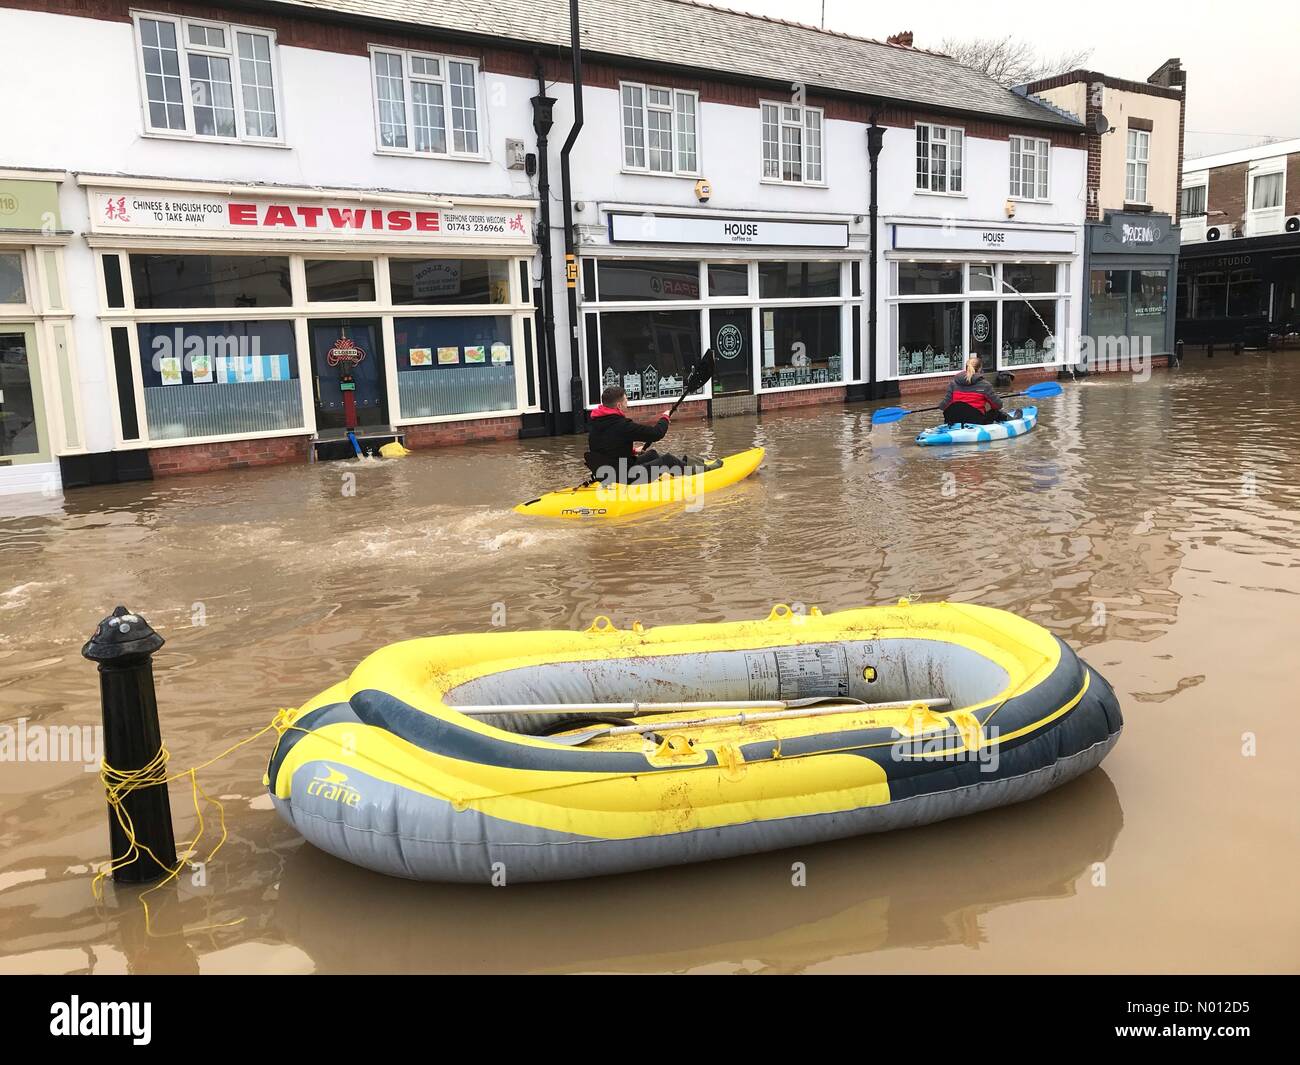 Shrewsbury, Shropshire. 25th Feb 2020. UK Weather Flooding in Shrewsbury - Tuesday 25th February 2020 Local shops flooded in the Coleham part of the city as the River Severn reaches new heights. Photo Steven May/Alamy Live News Credit: Steven May/StockimoNews/Alamy Live News Stock Photo